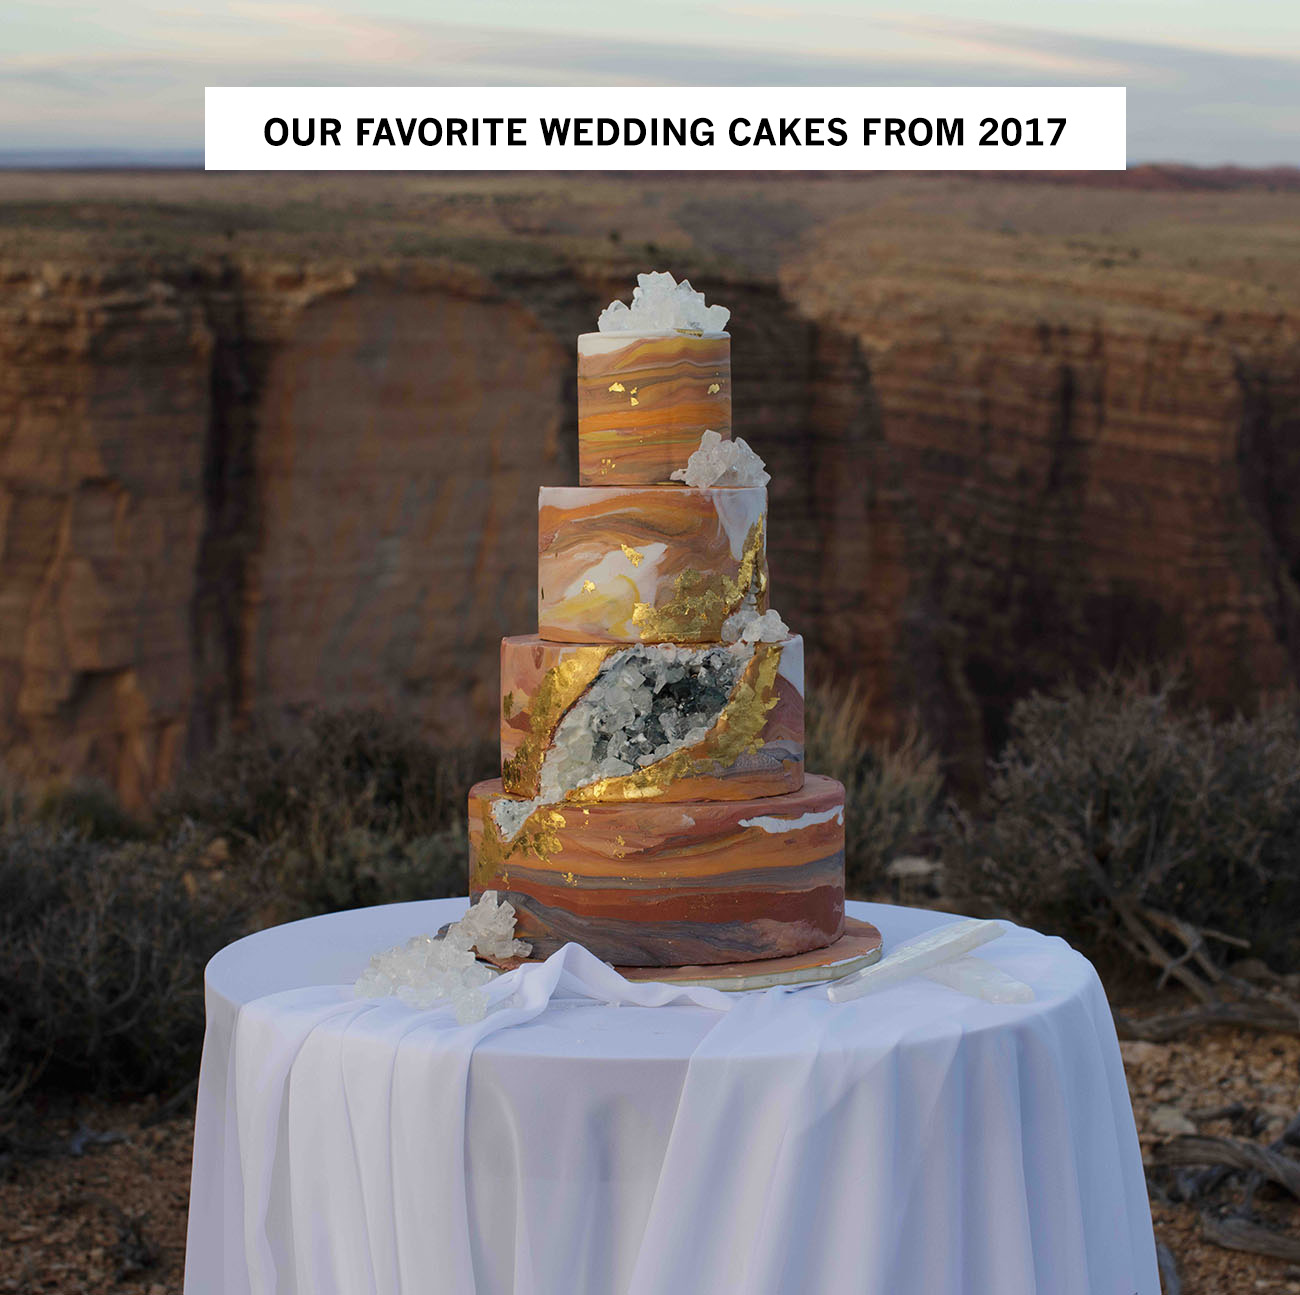 Our Favorite Wedding Cakes from 2017